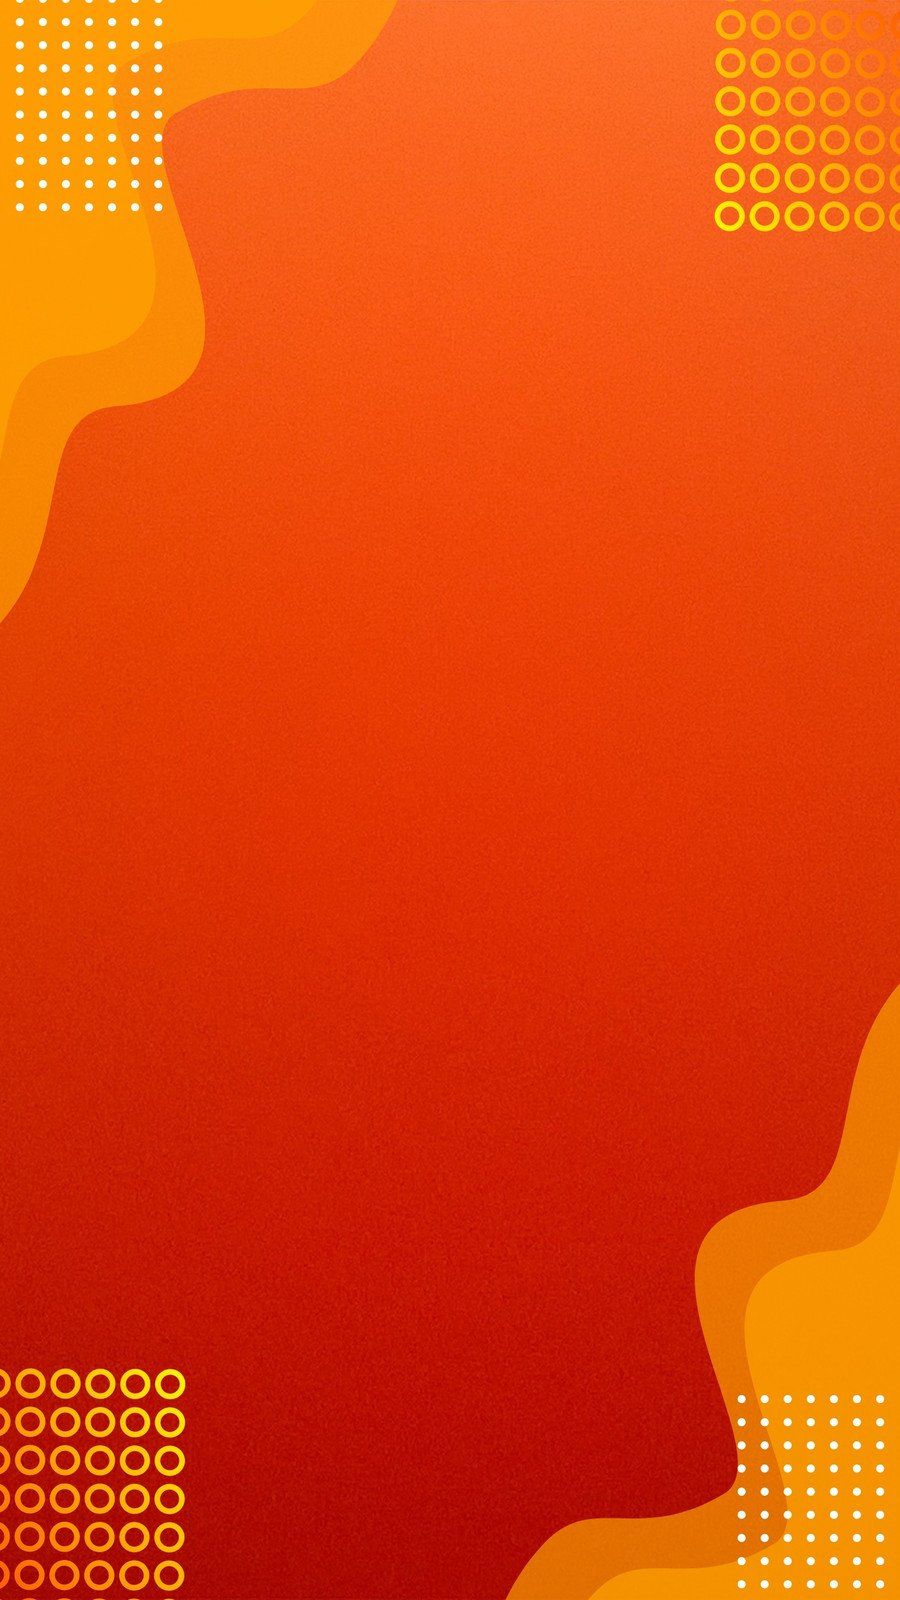 An orange and yellow abstract background - Modern